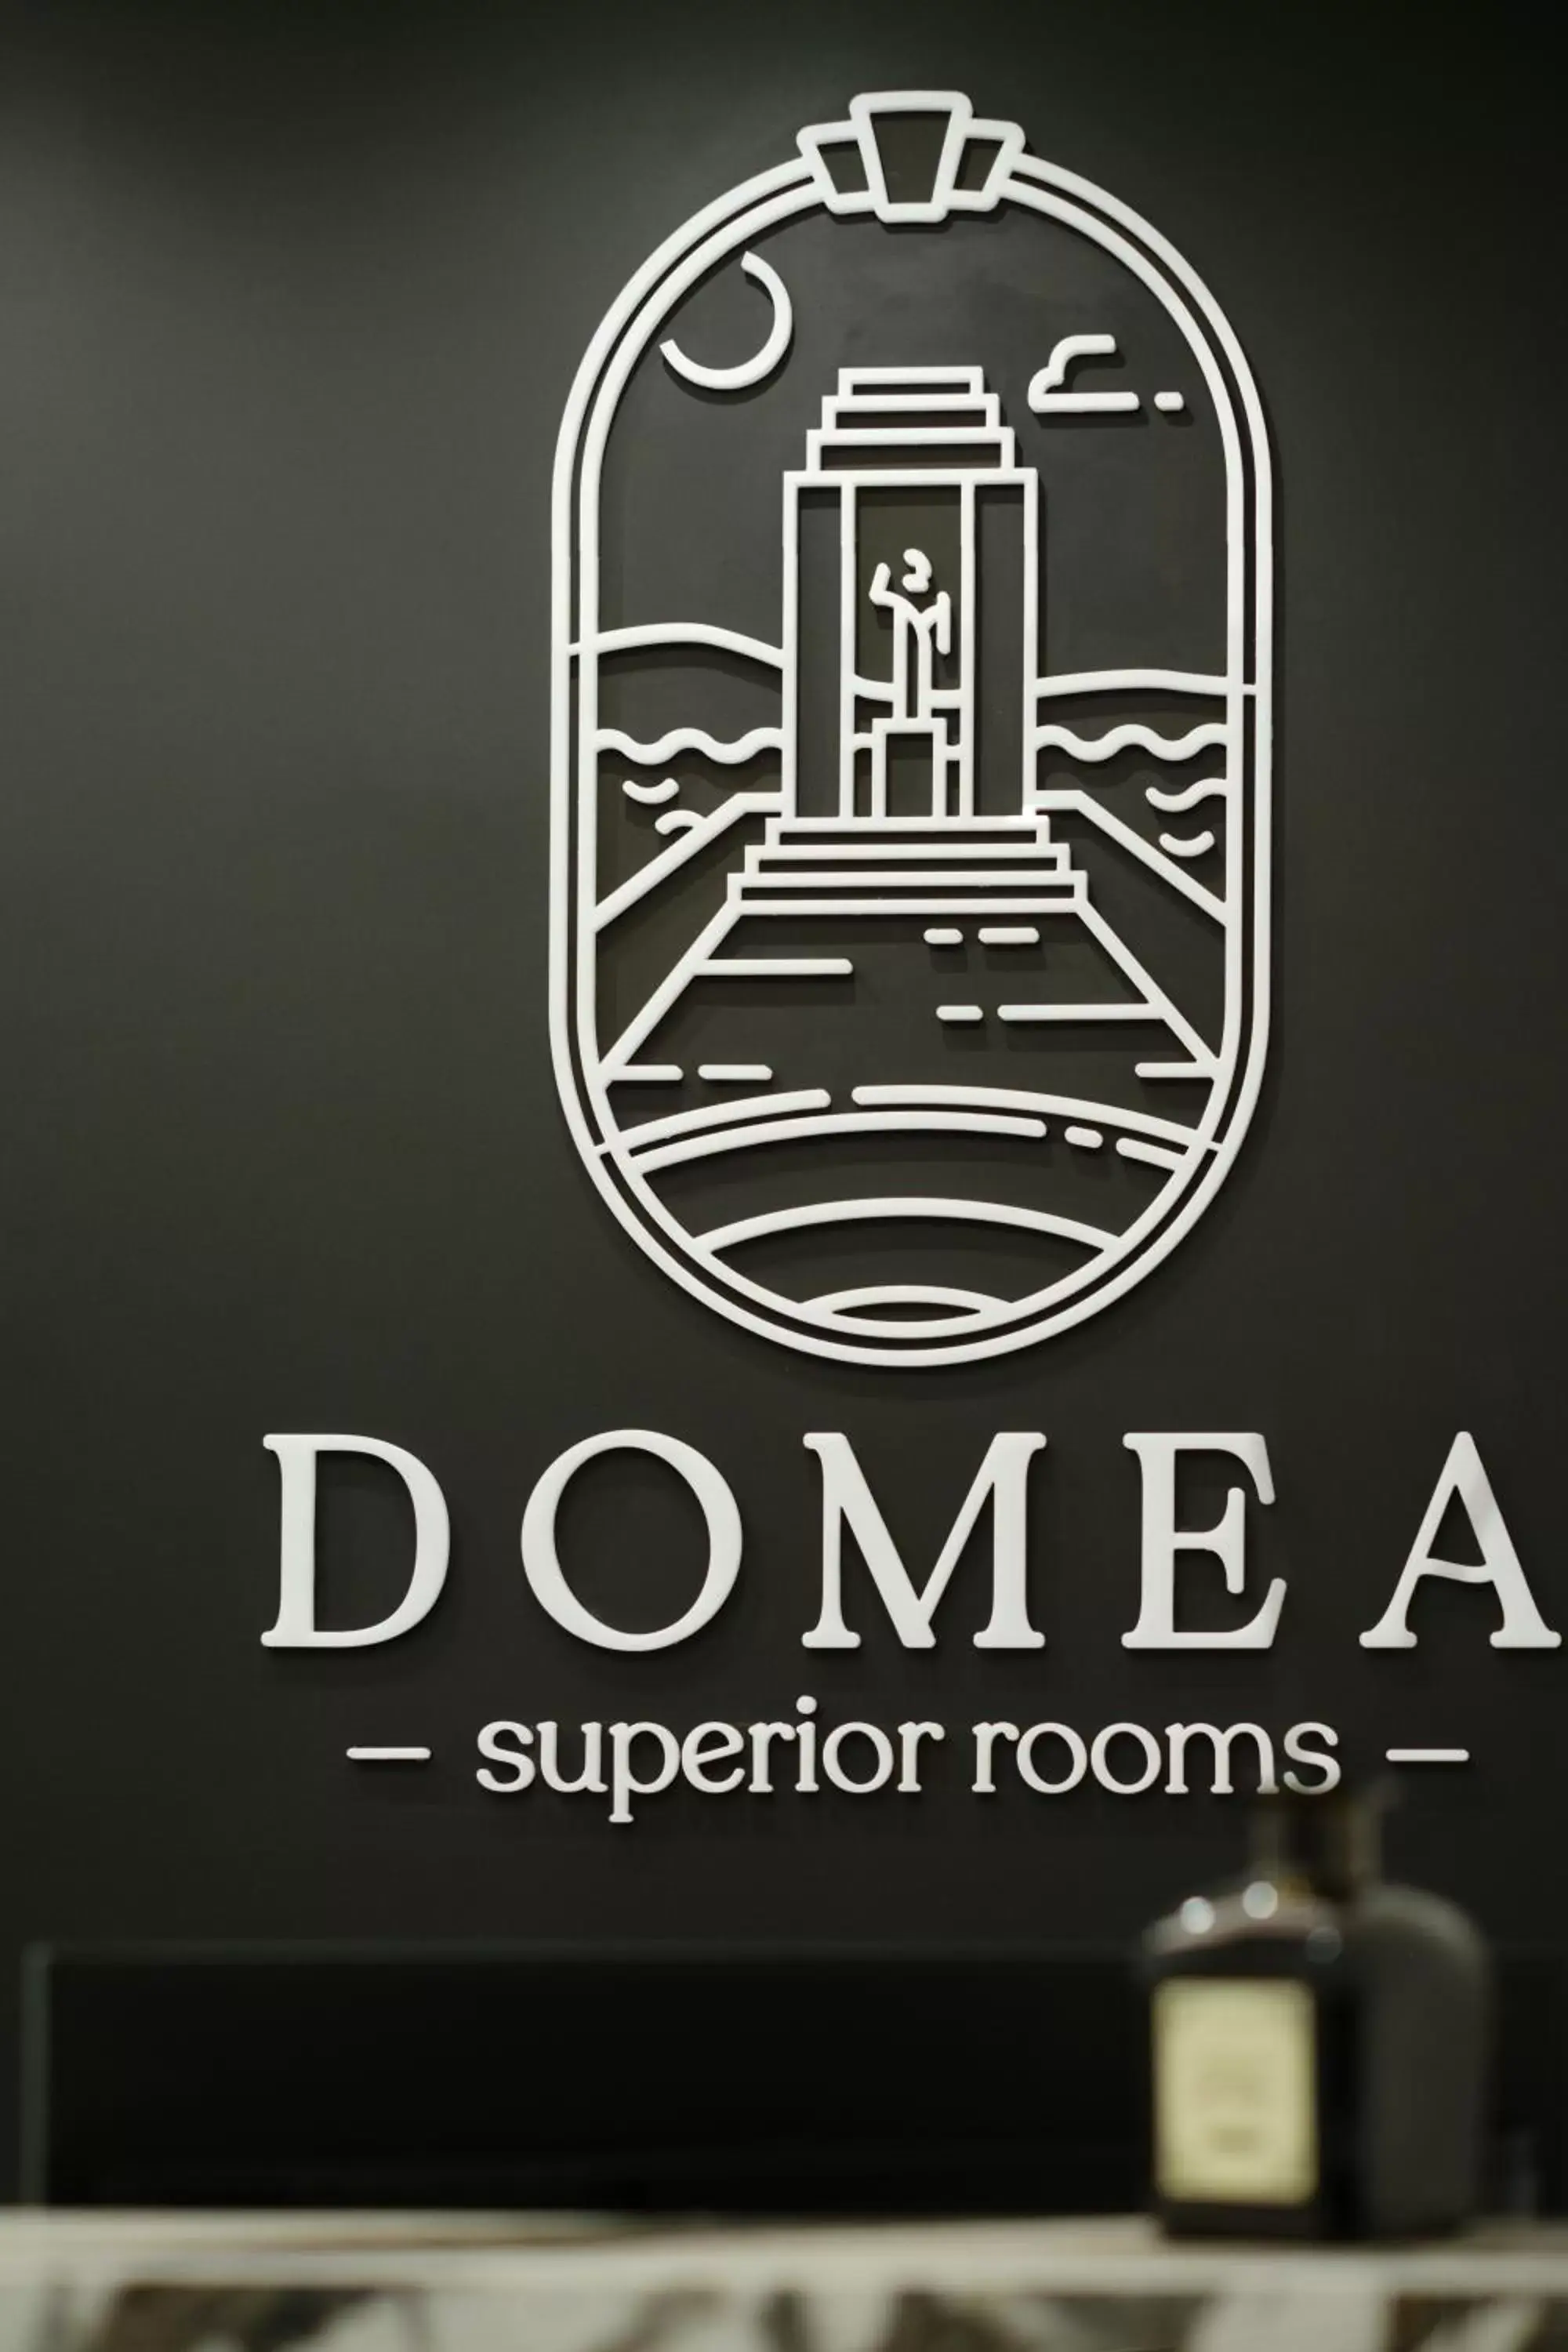 Property logo or sign in Domea Superior Rooms Bed and Breakfast